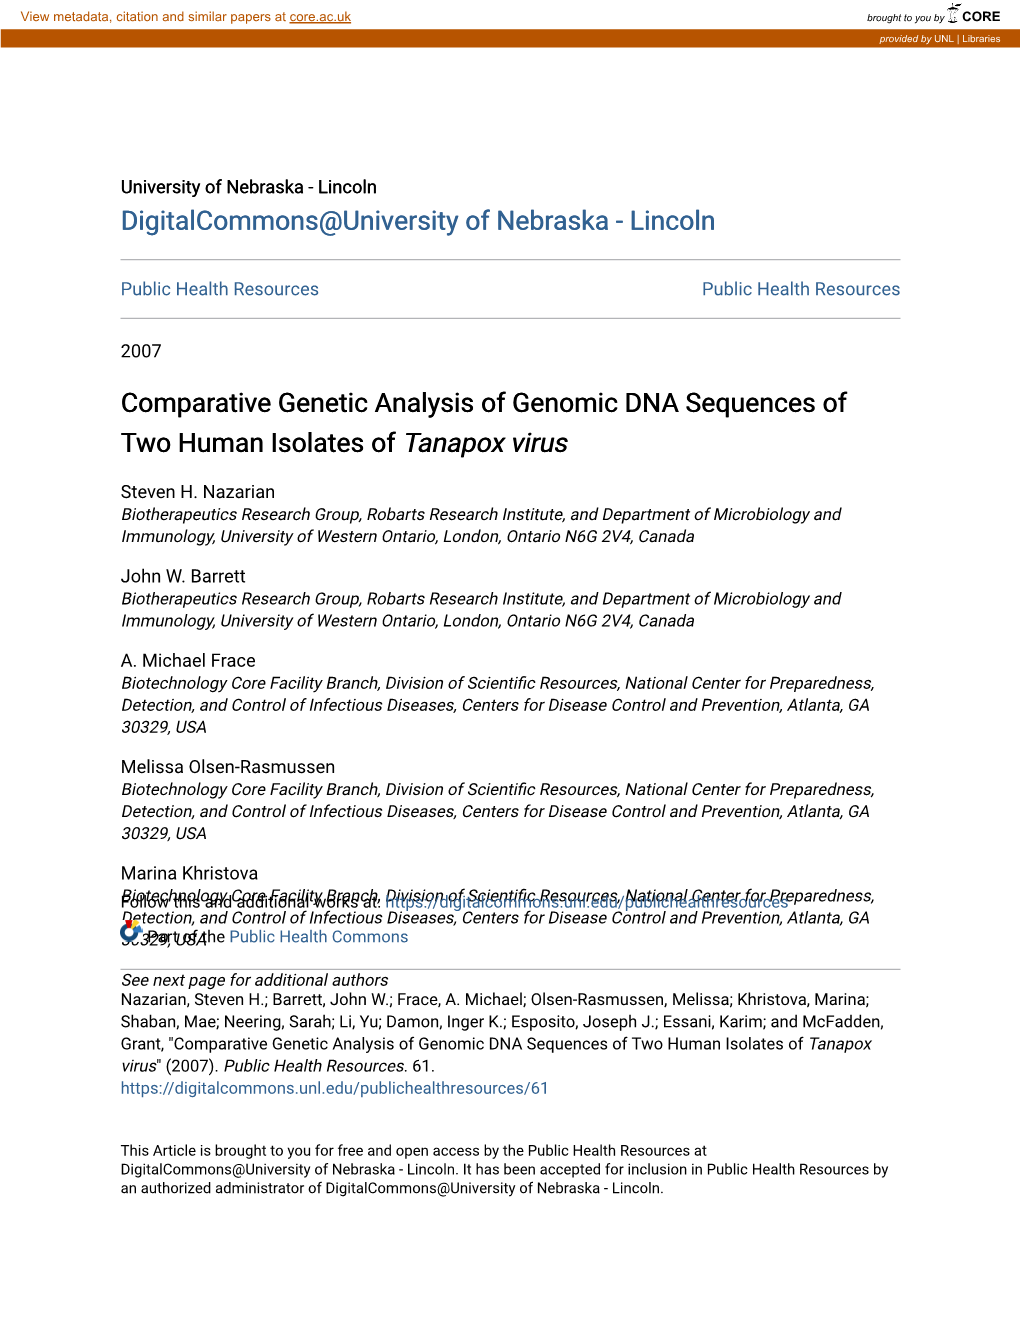 Comparative Genetic Analysis of Genomic DNA Sequences of Two Human Isolates of Tanapox Virus